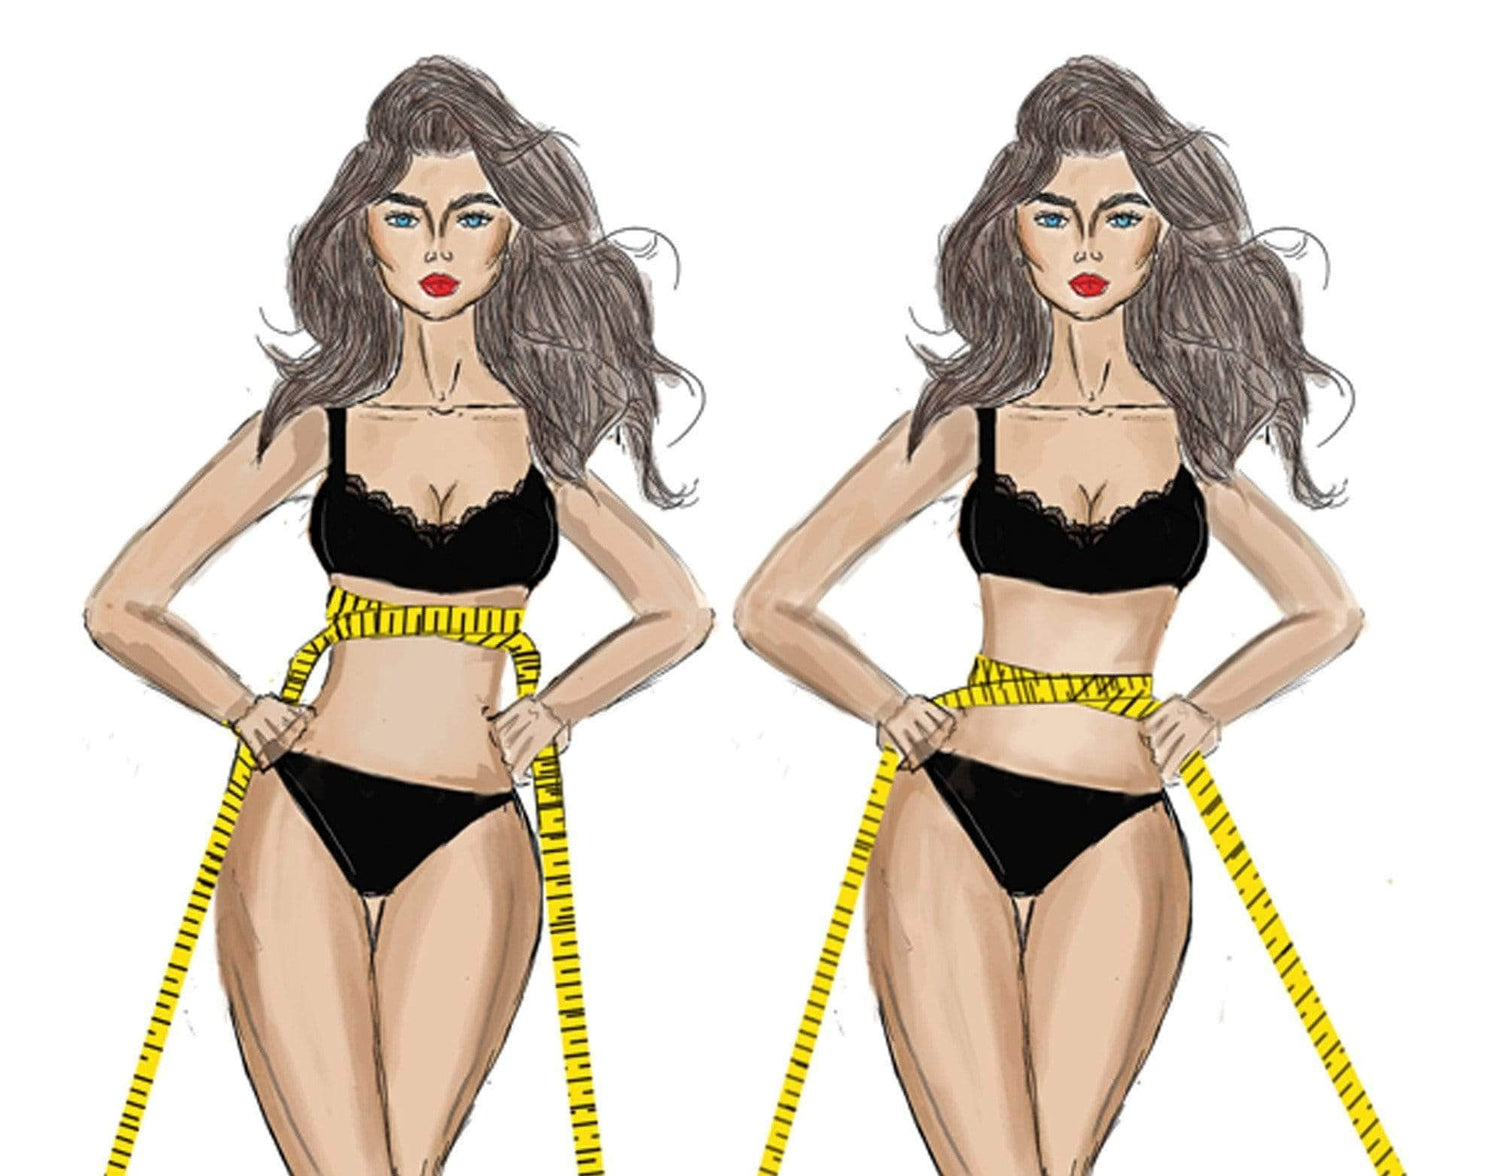 Diva's Curves How to Measure Yourself for Shapewear, Compression Garments, Plus Size Shapewear.